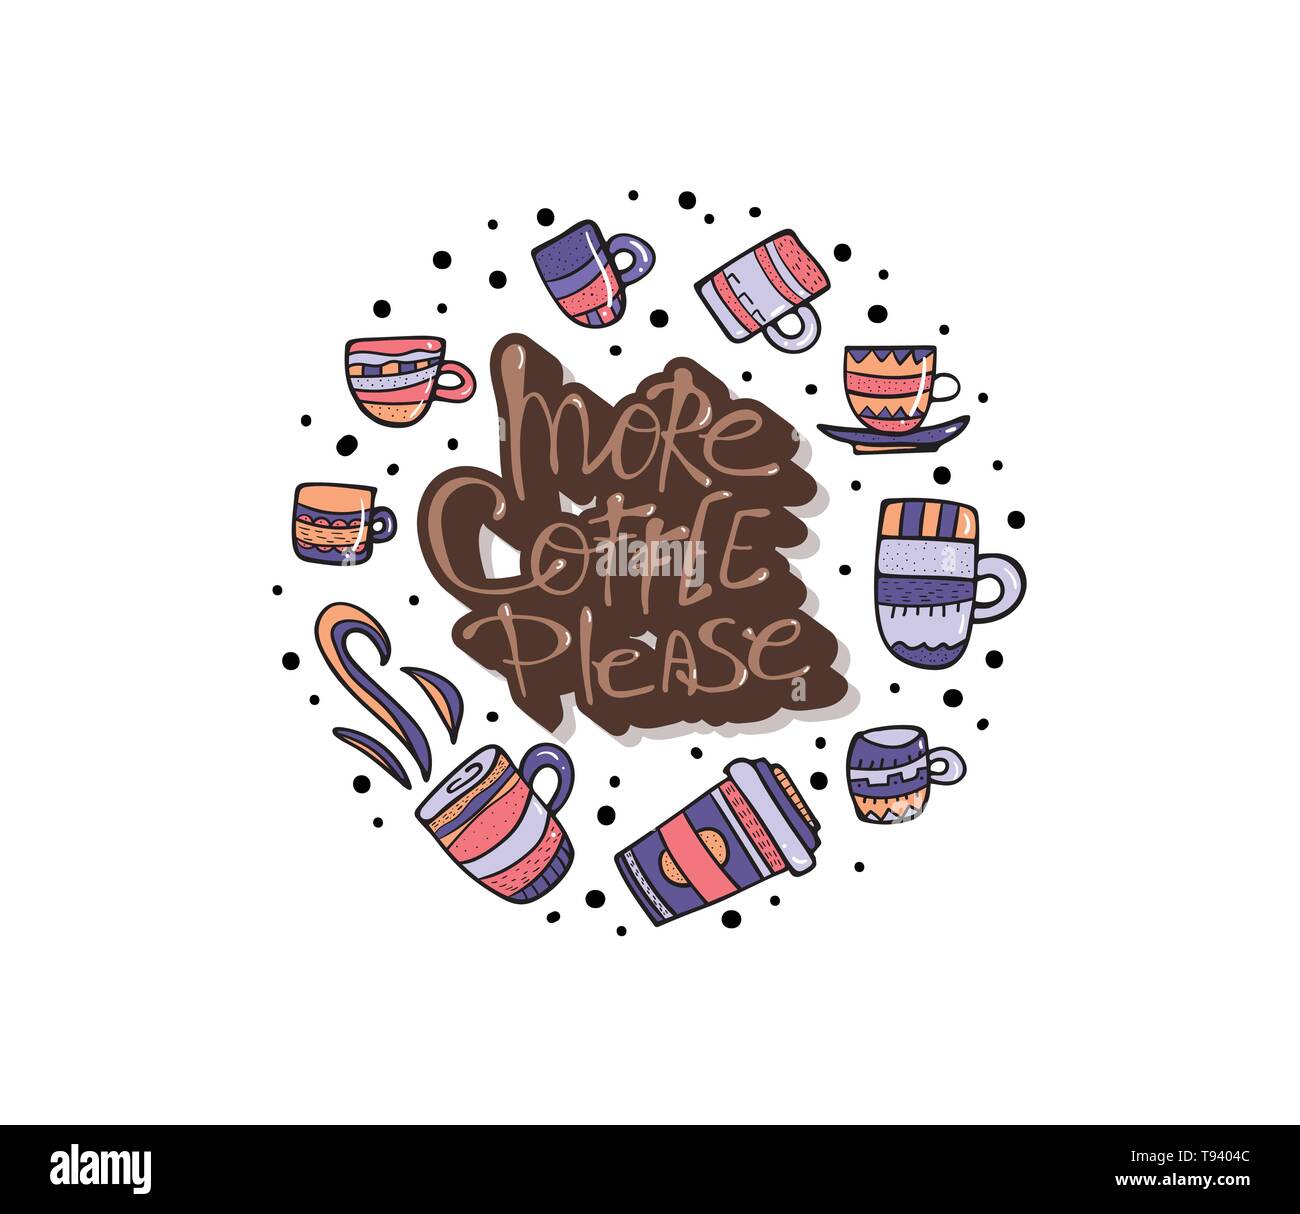 More coffe please lettering with mugs. Round badge composition. Set of cups with hot beverage in doodle style. Poster template. Vector illustration. Stock Vector